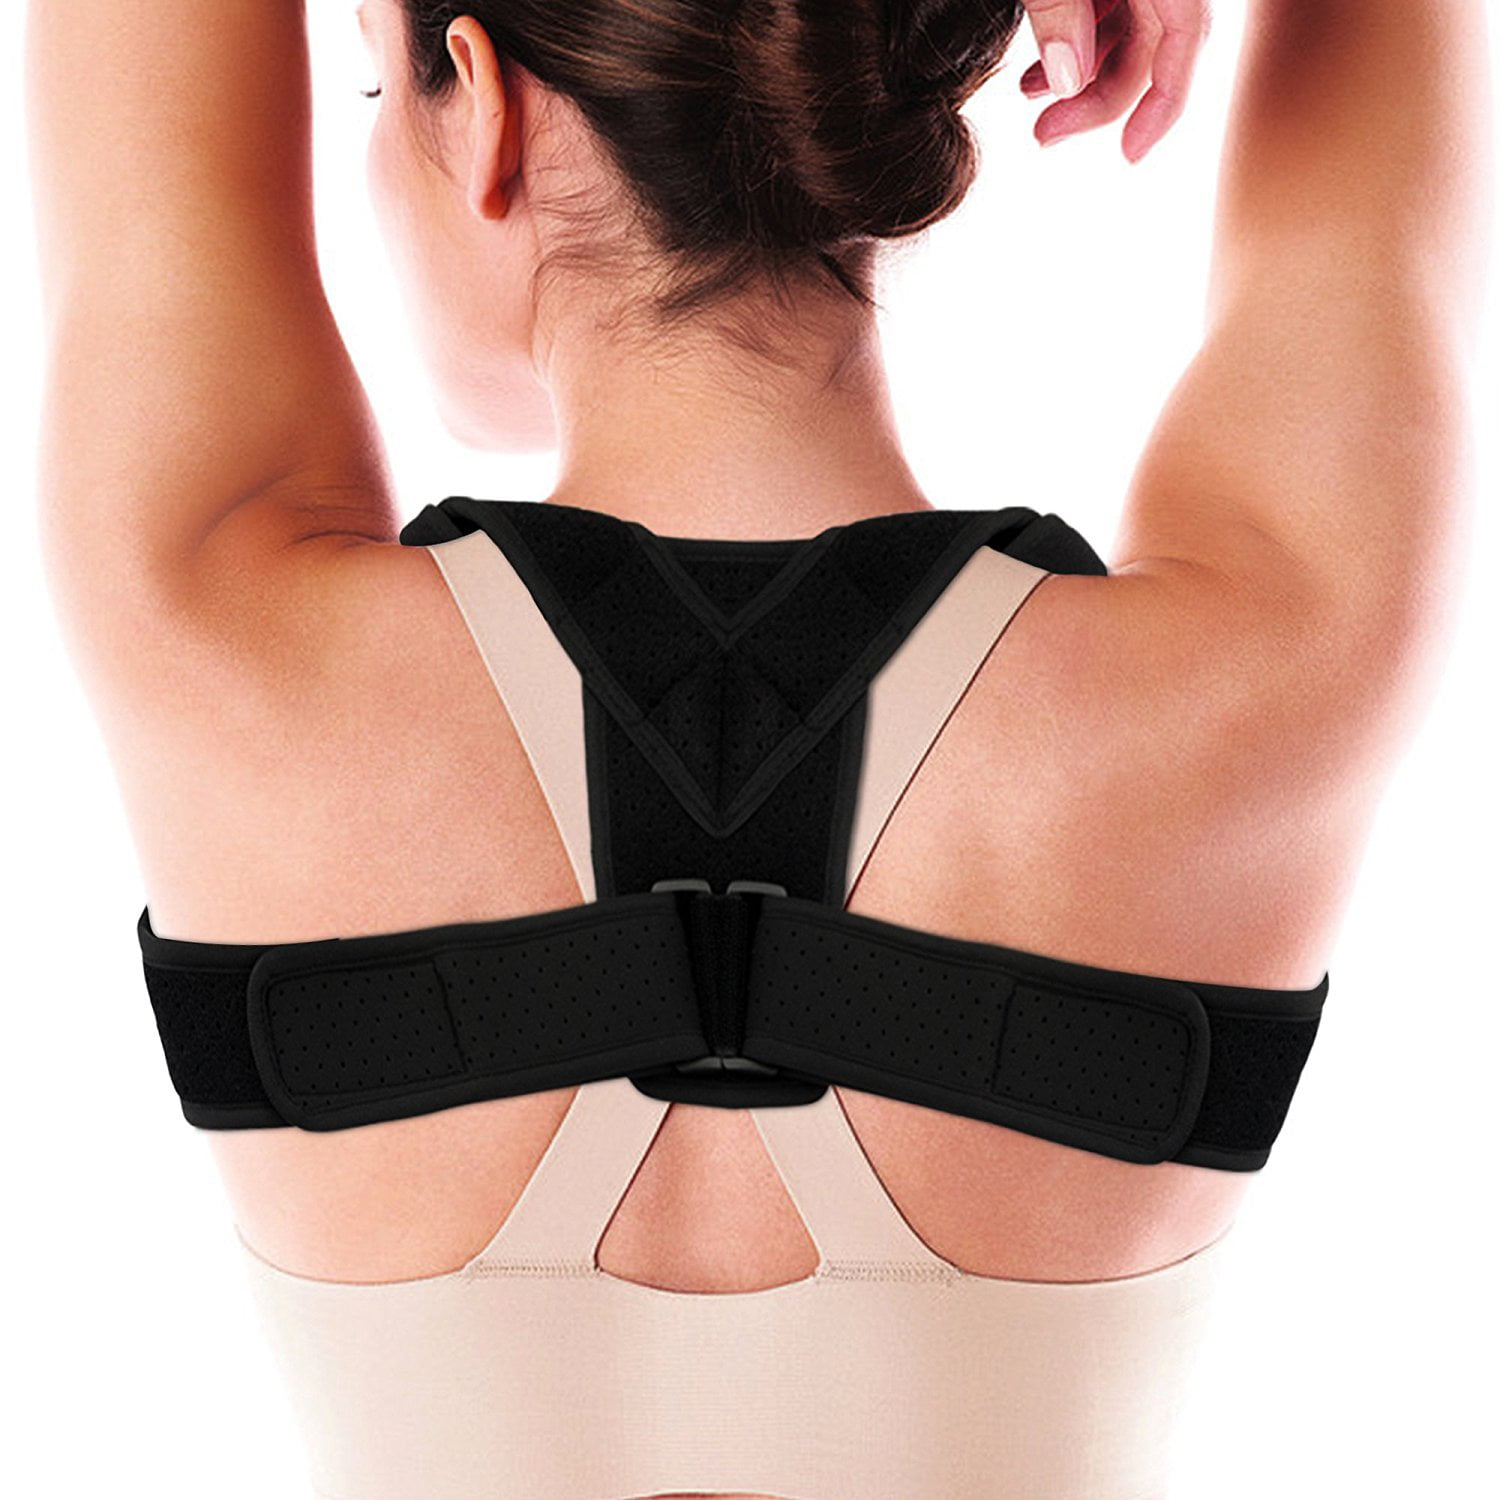 Posture Corrector Back Brace for Woman and Men L Comfortable Fully Adjustable Spine Corrector Clavicle Support Improve Posture Shoulder Alignment and Pain Relief 